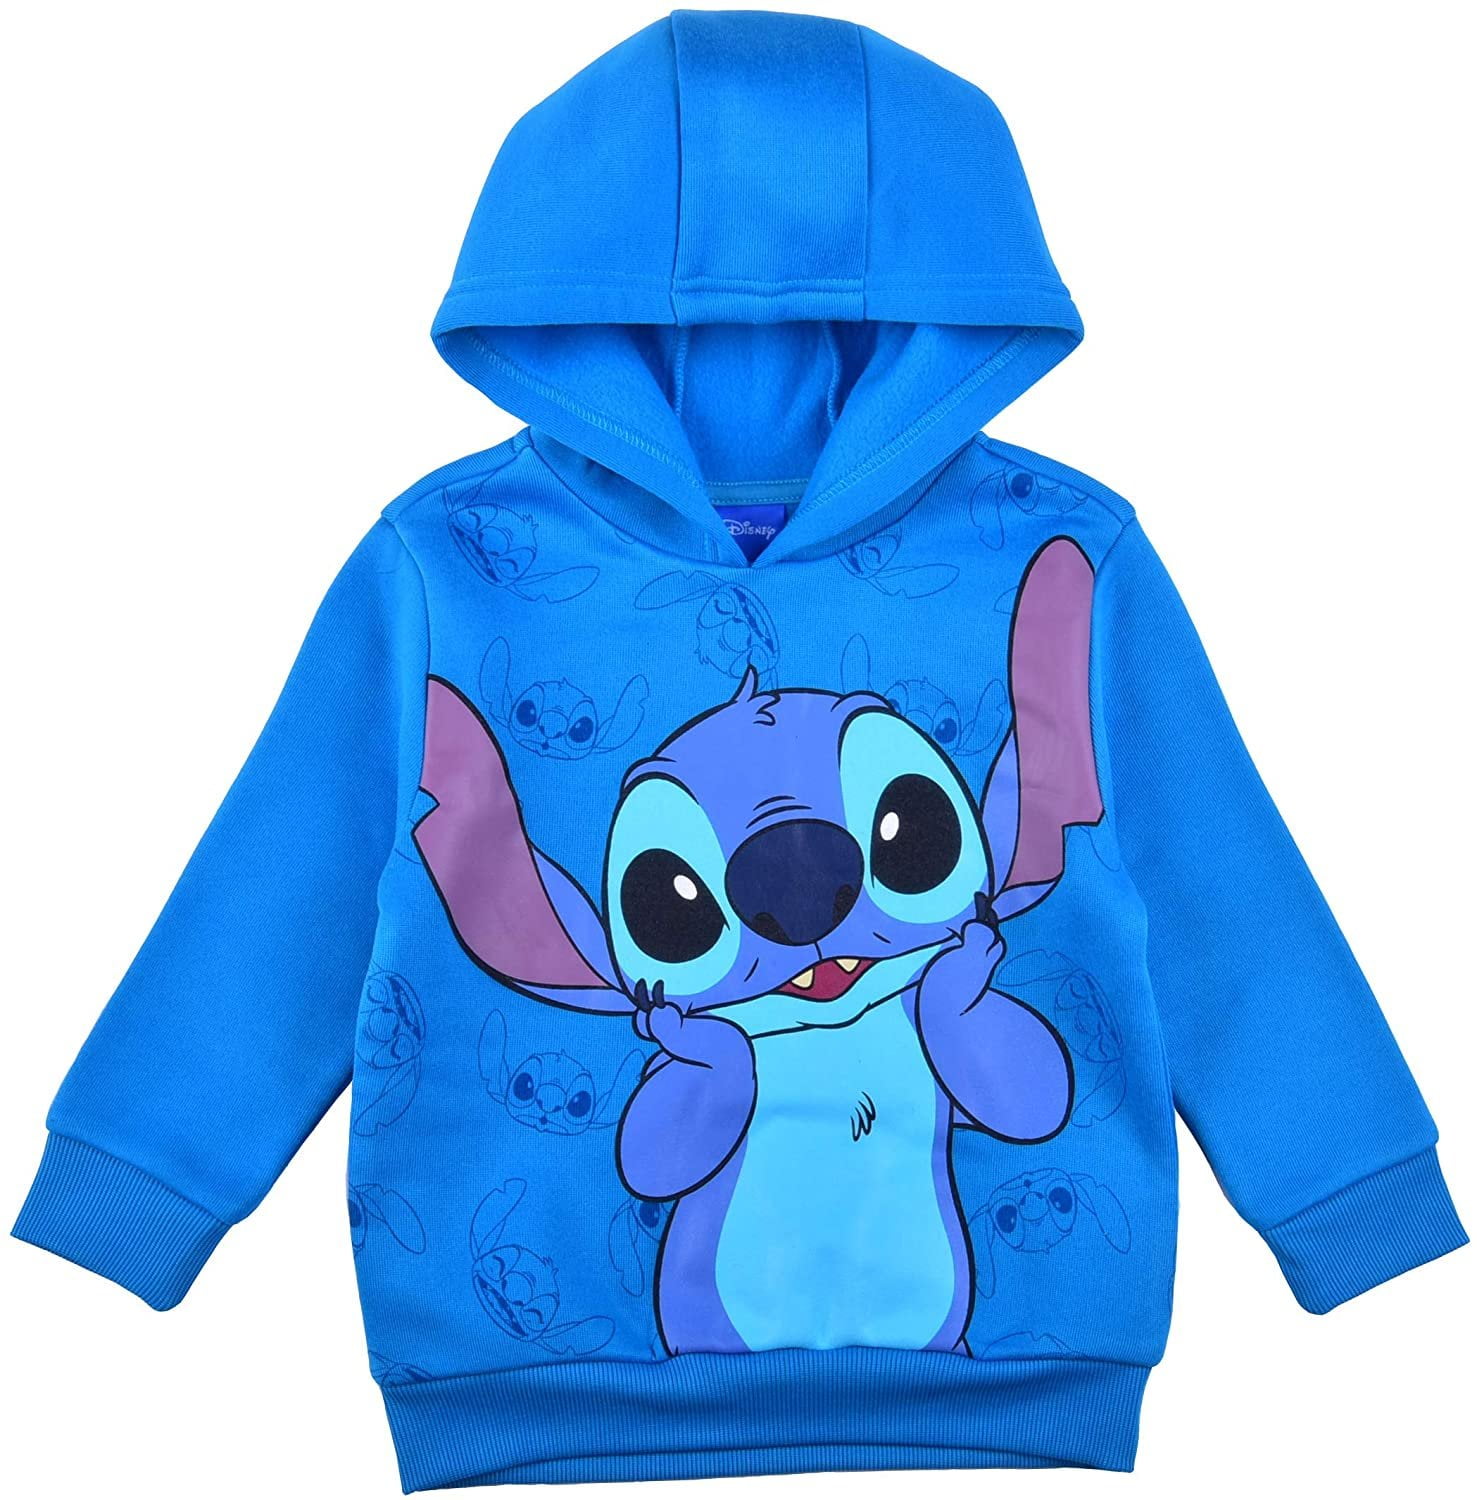 Share The Love Children Kids Hoodie Mix Coloured Dotty Girls Boys Hooded 